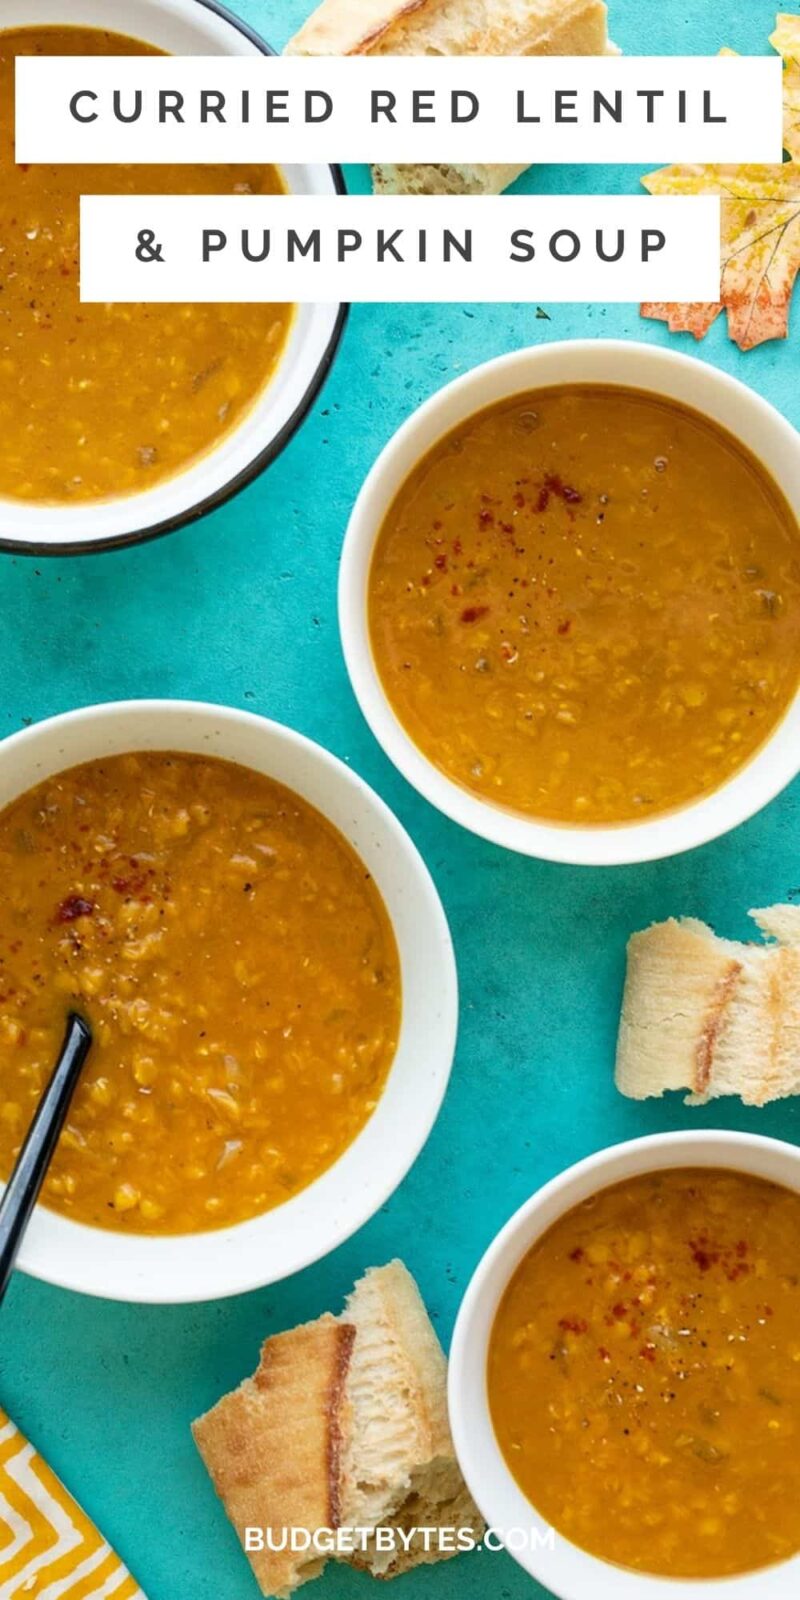 Four bowls of curried red lentil and pumpkin soup, title text at the top